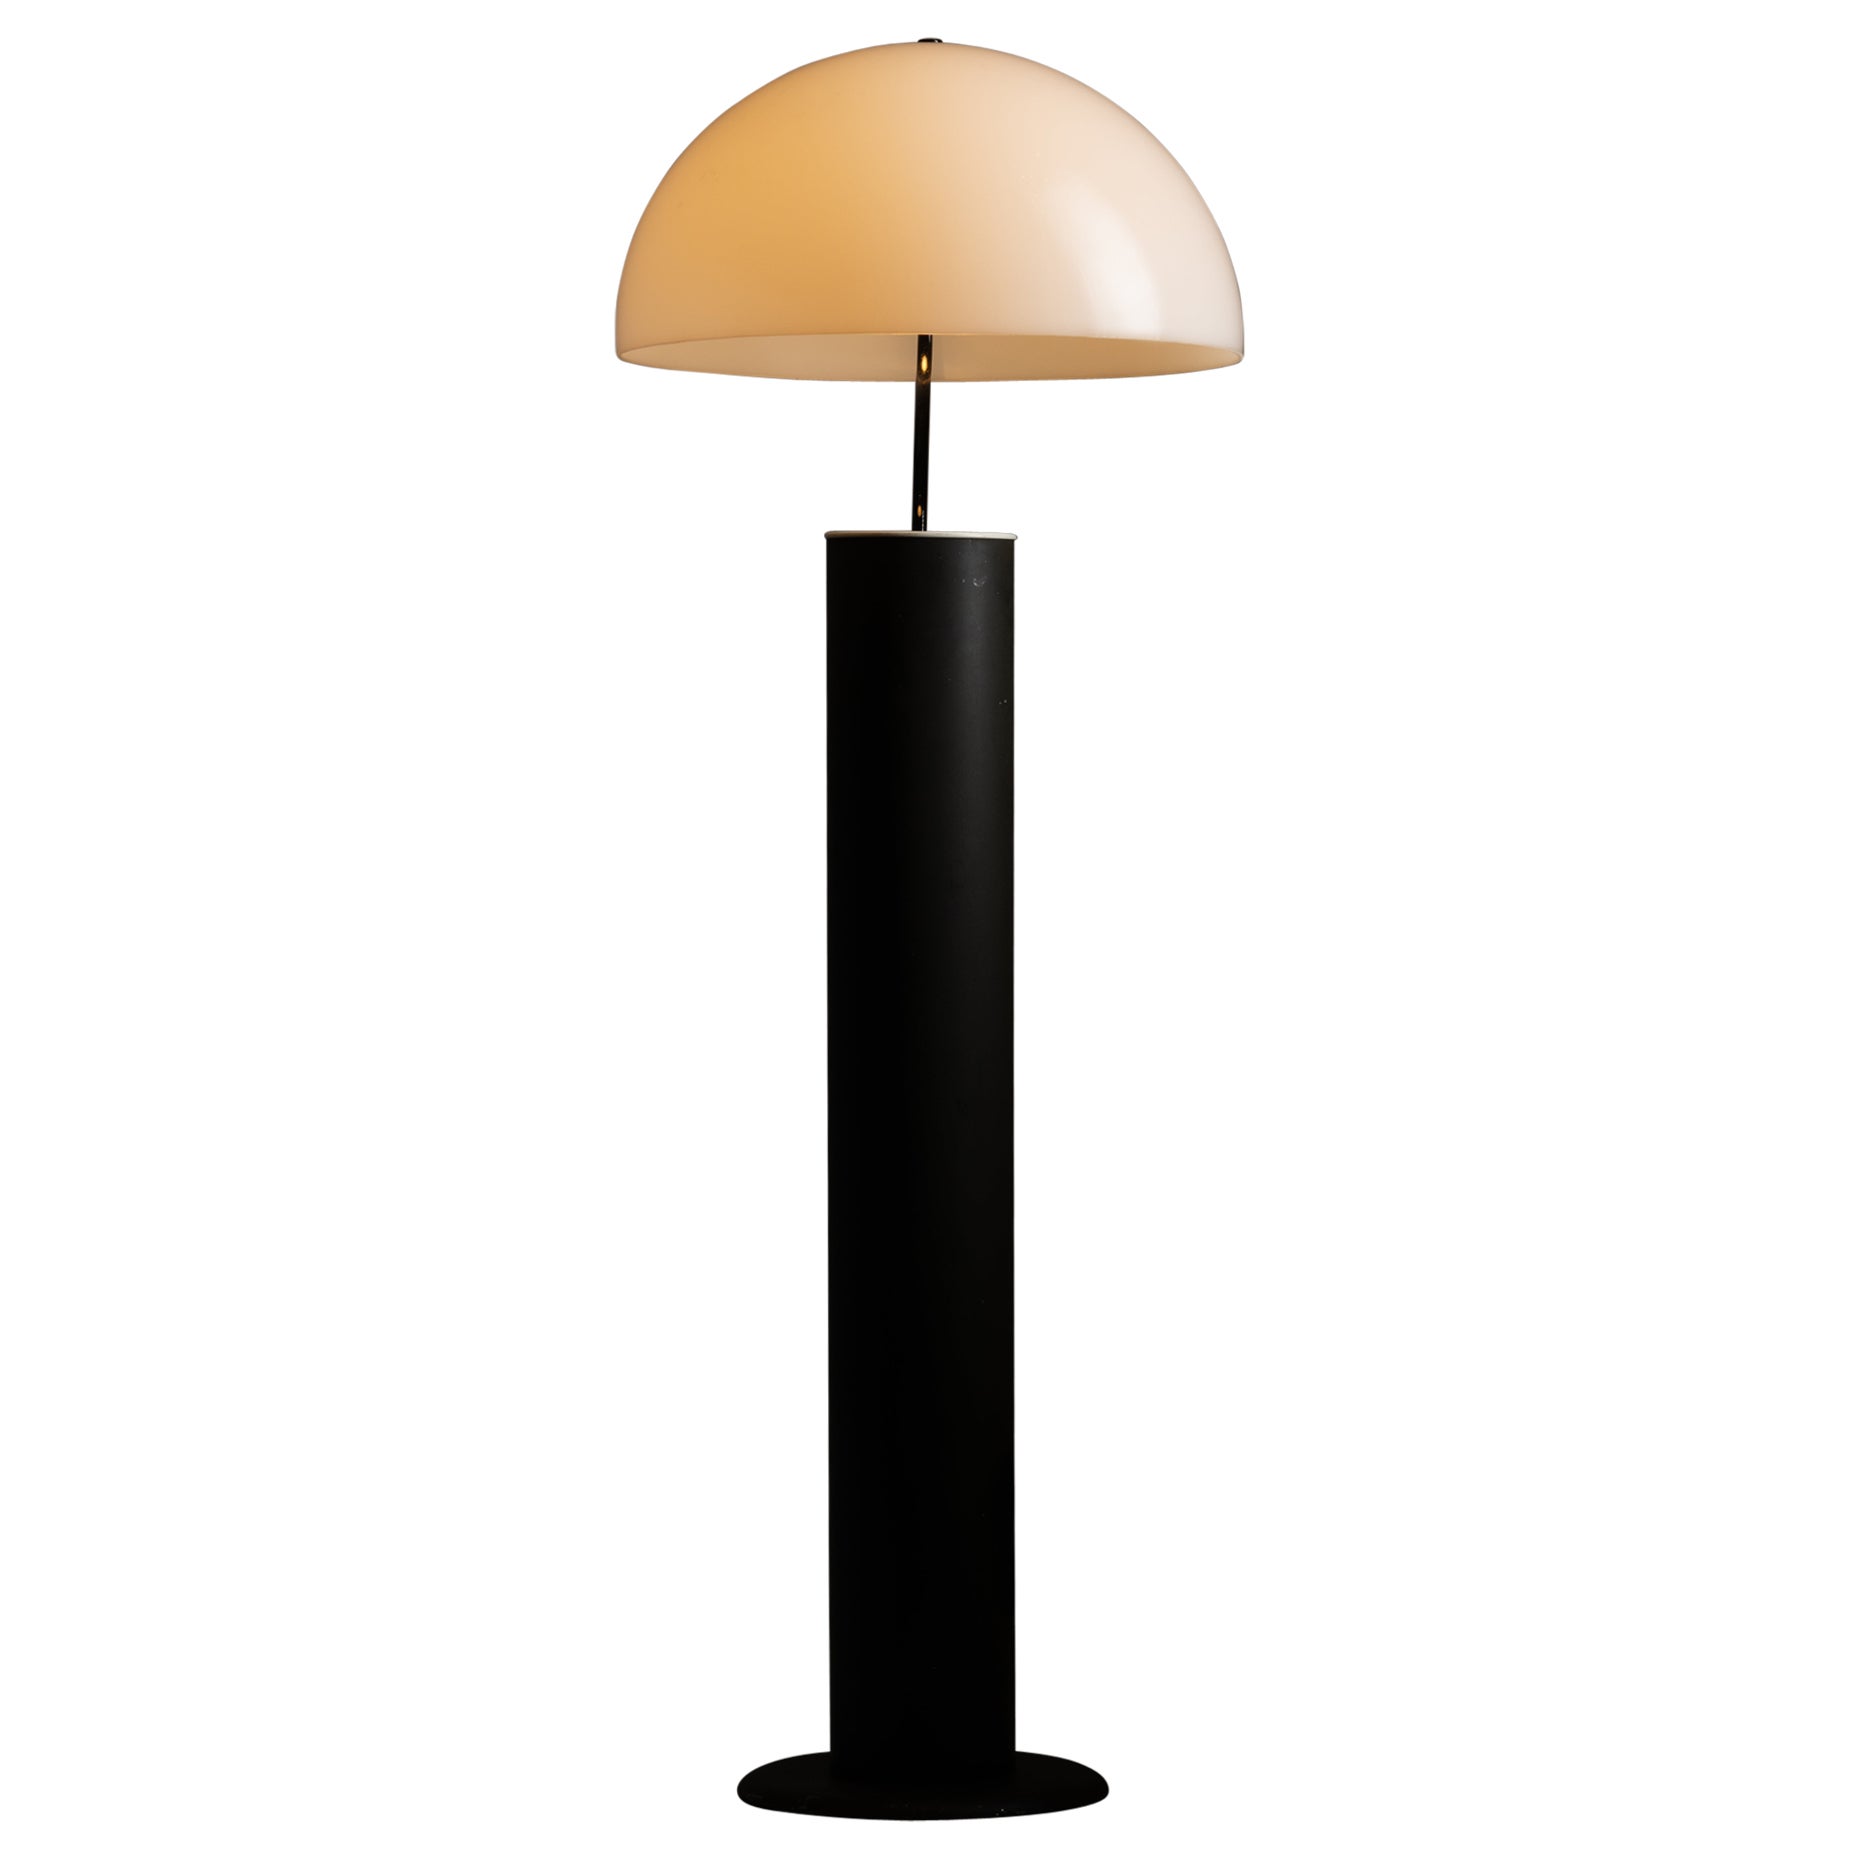 Alida Floor Lamp by Vico Magistretti for Oluce For Sale